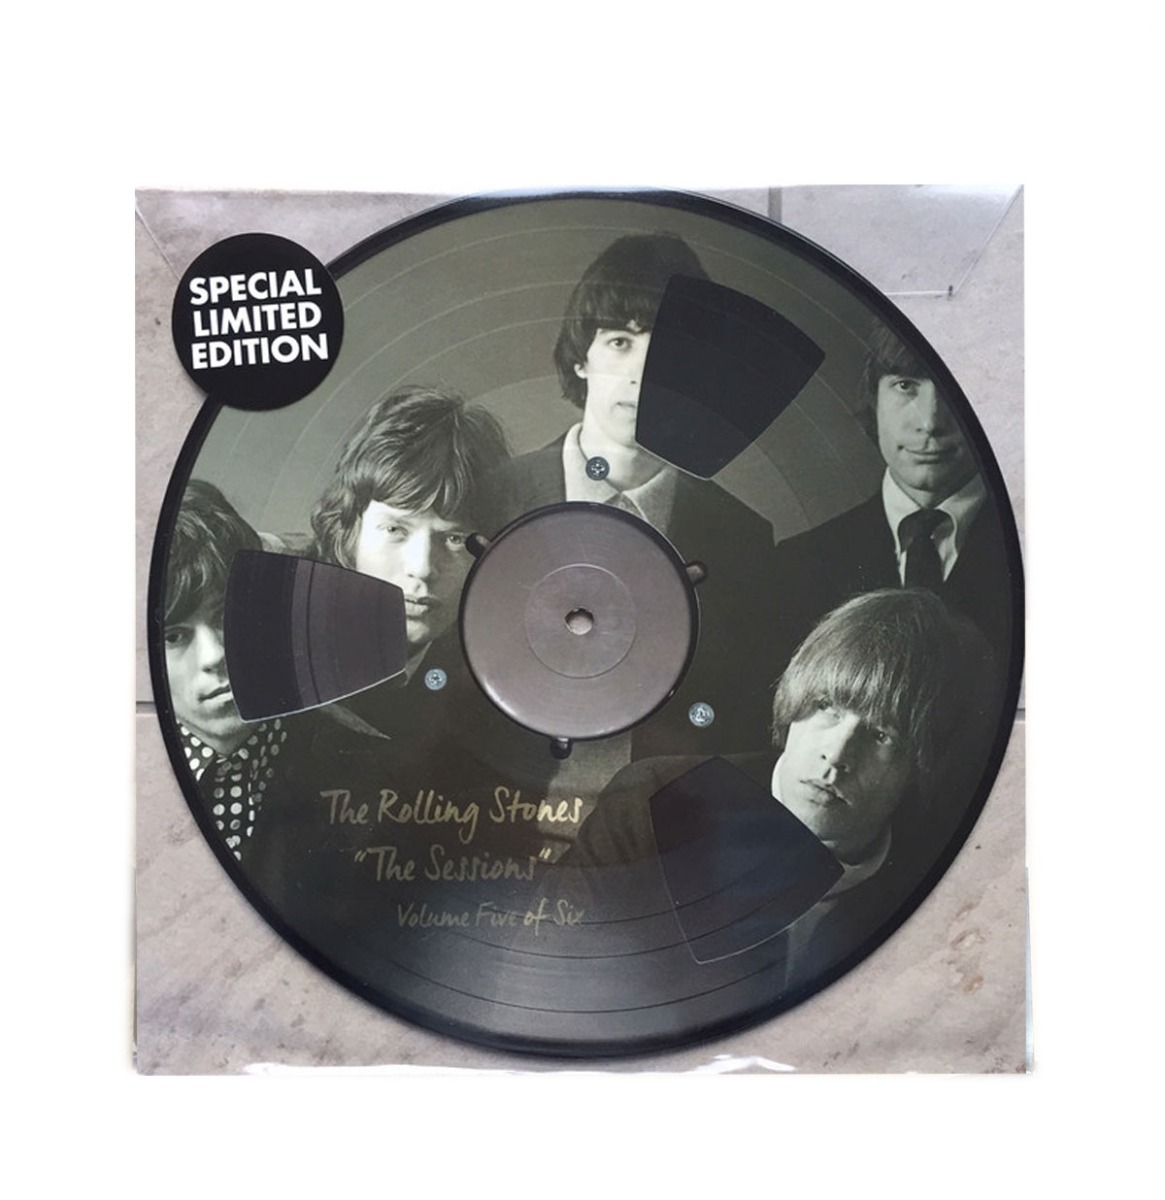 The Rolling Stones - The Sessions vol. 5 of 6 - Picture Disc LP